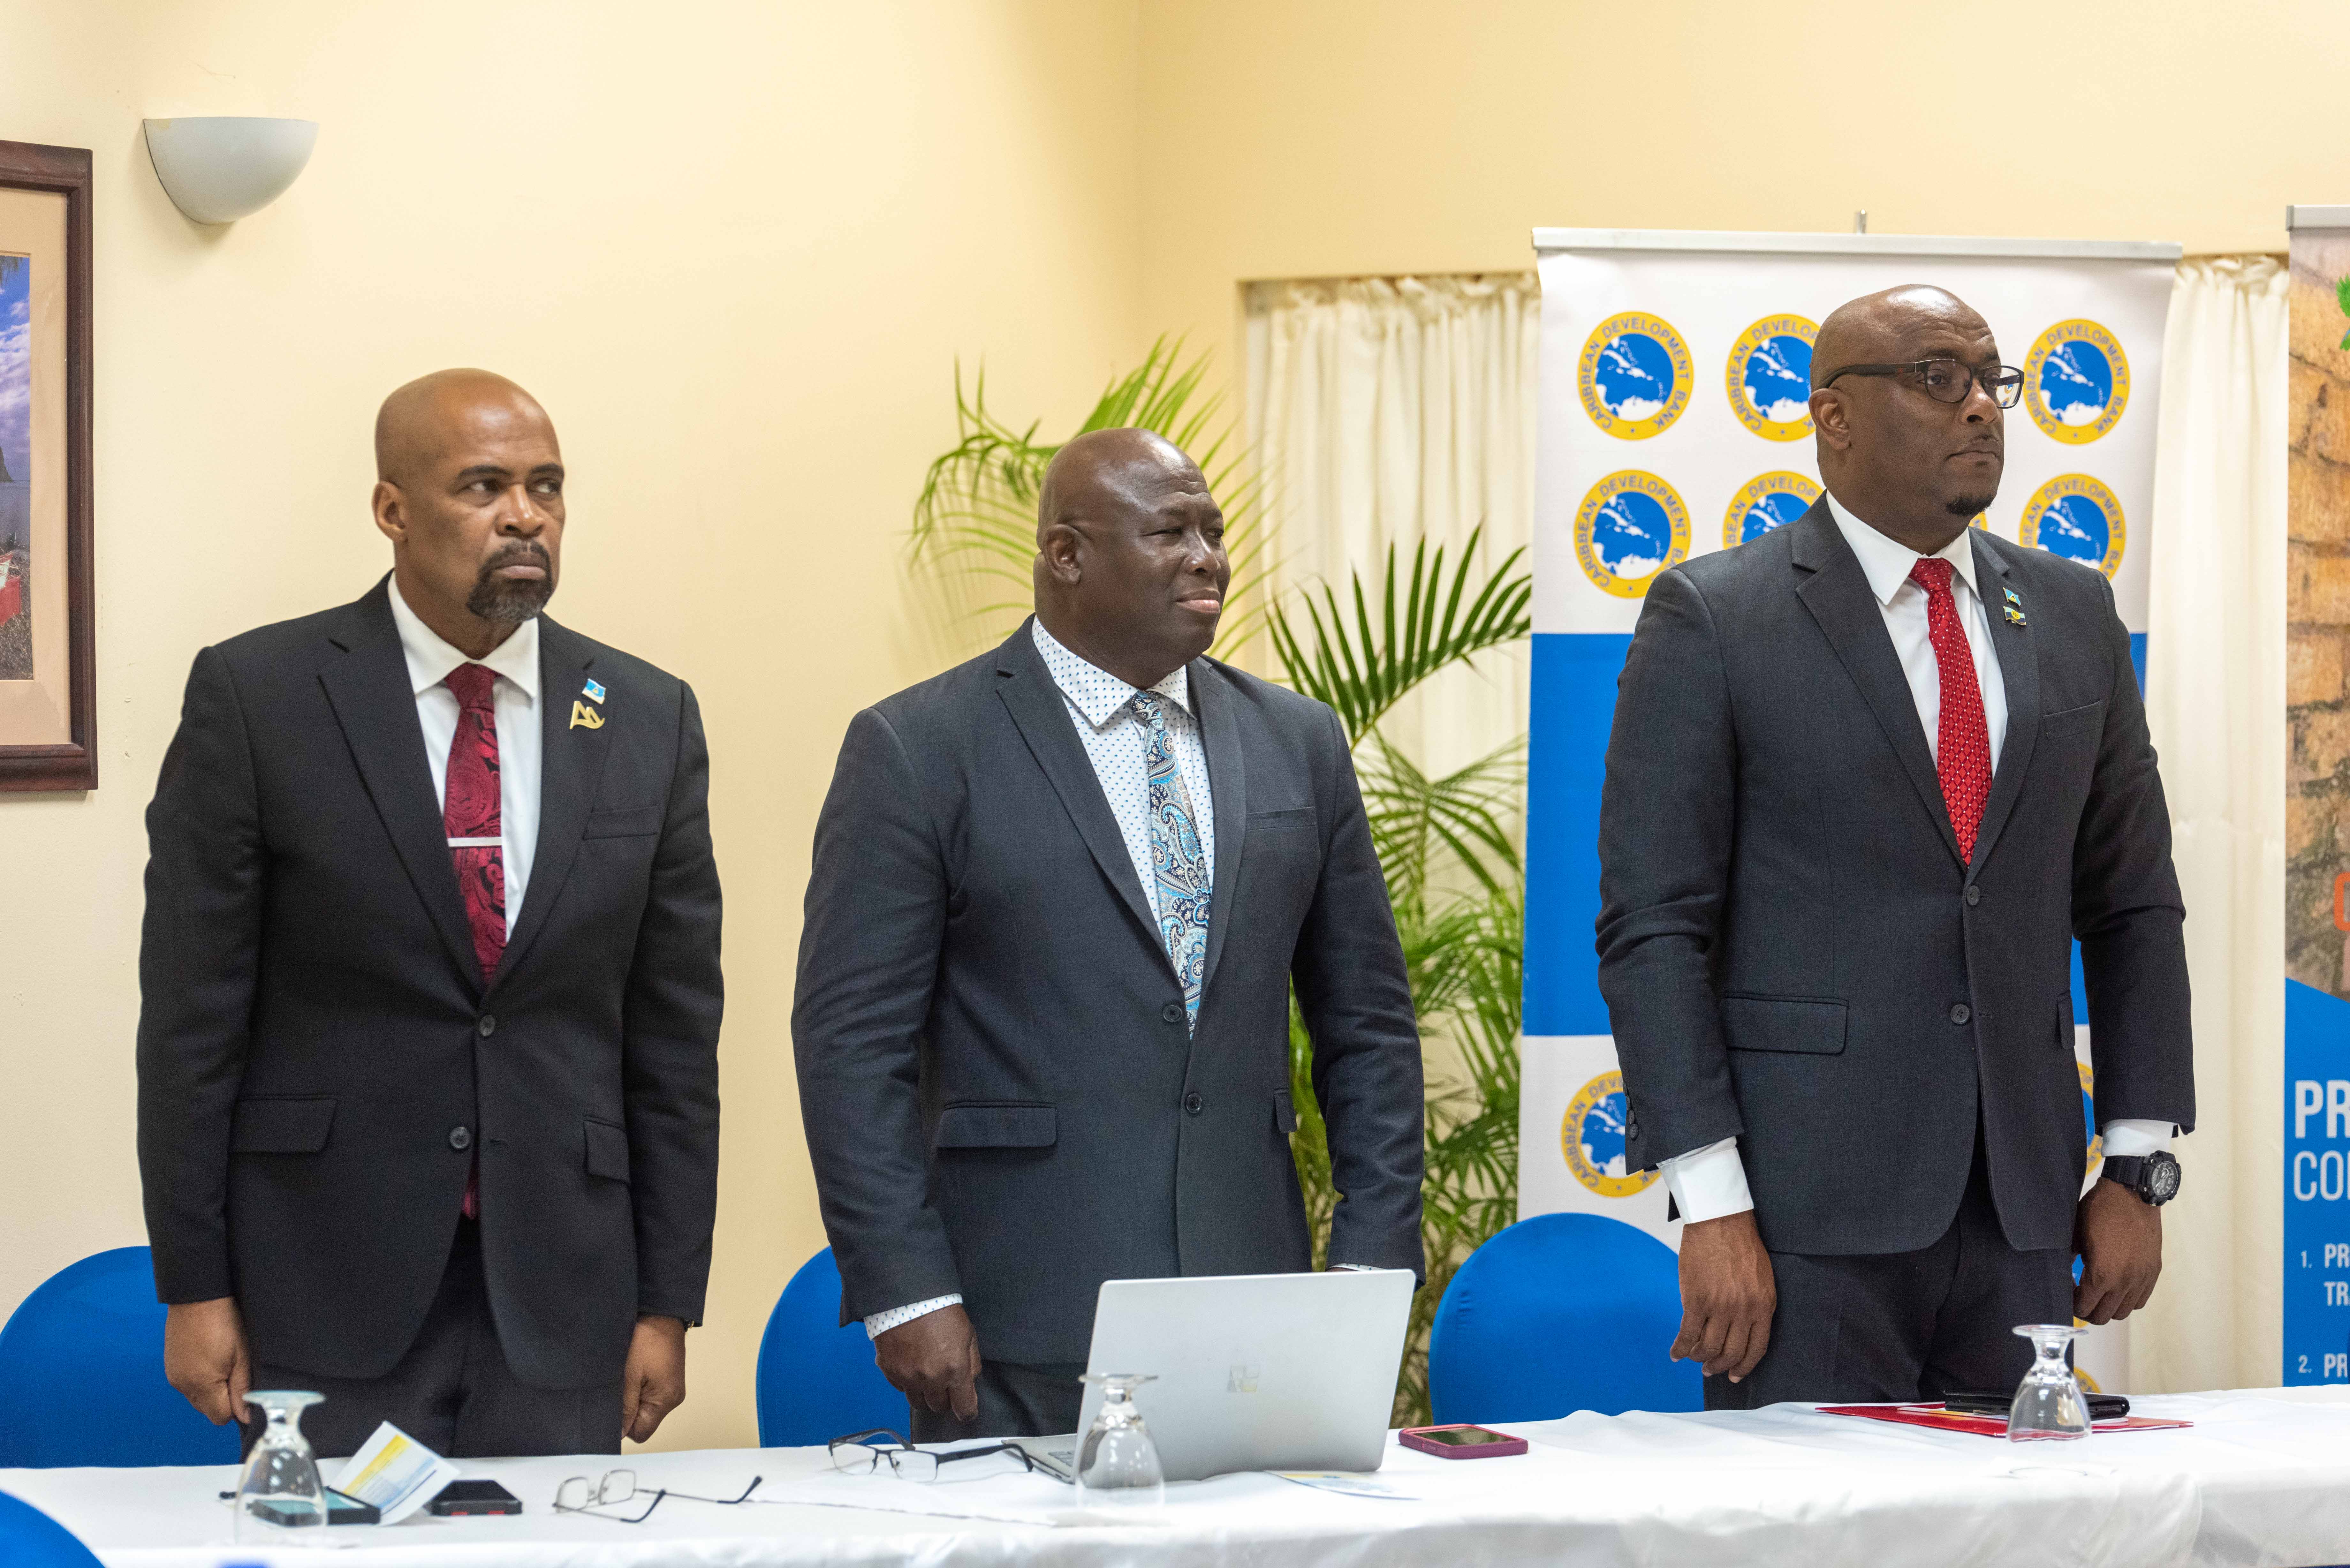 St Lucia Government officials and CDB Division Chief